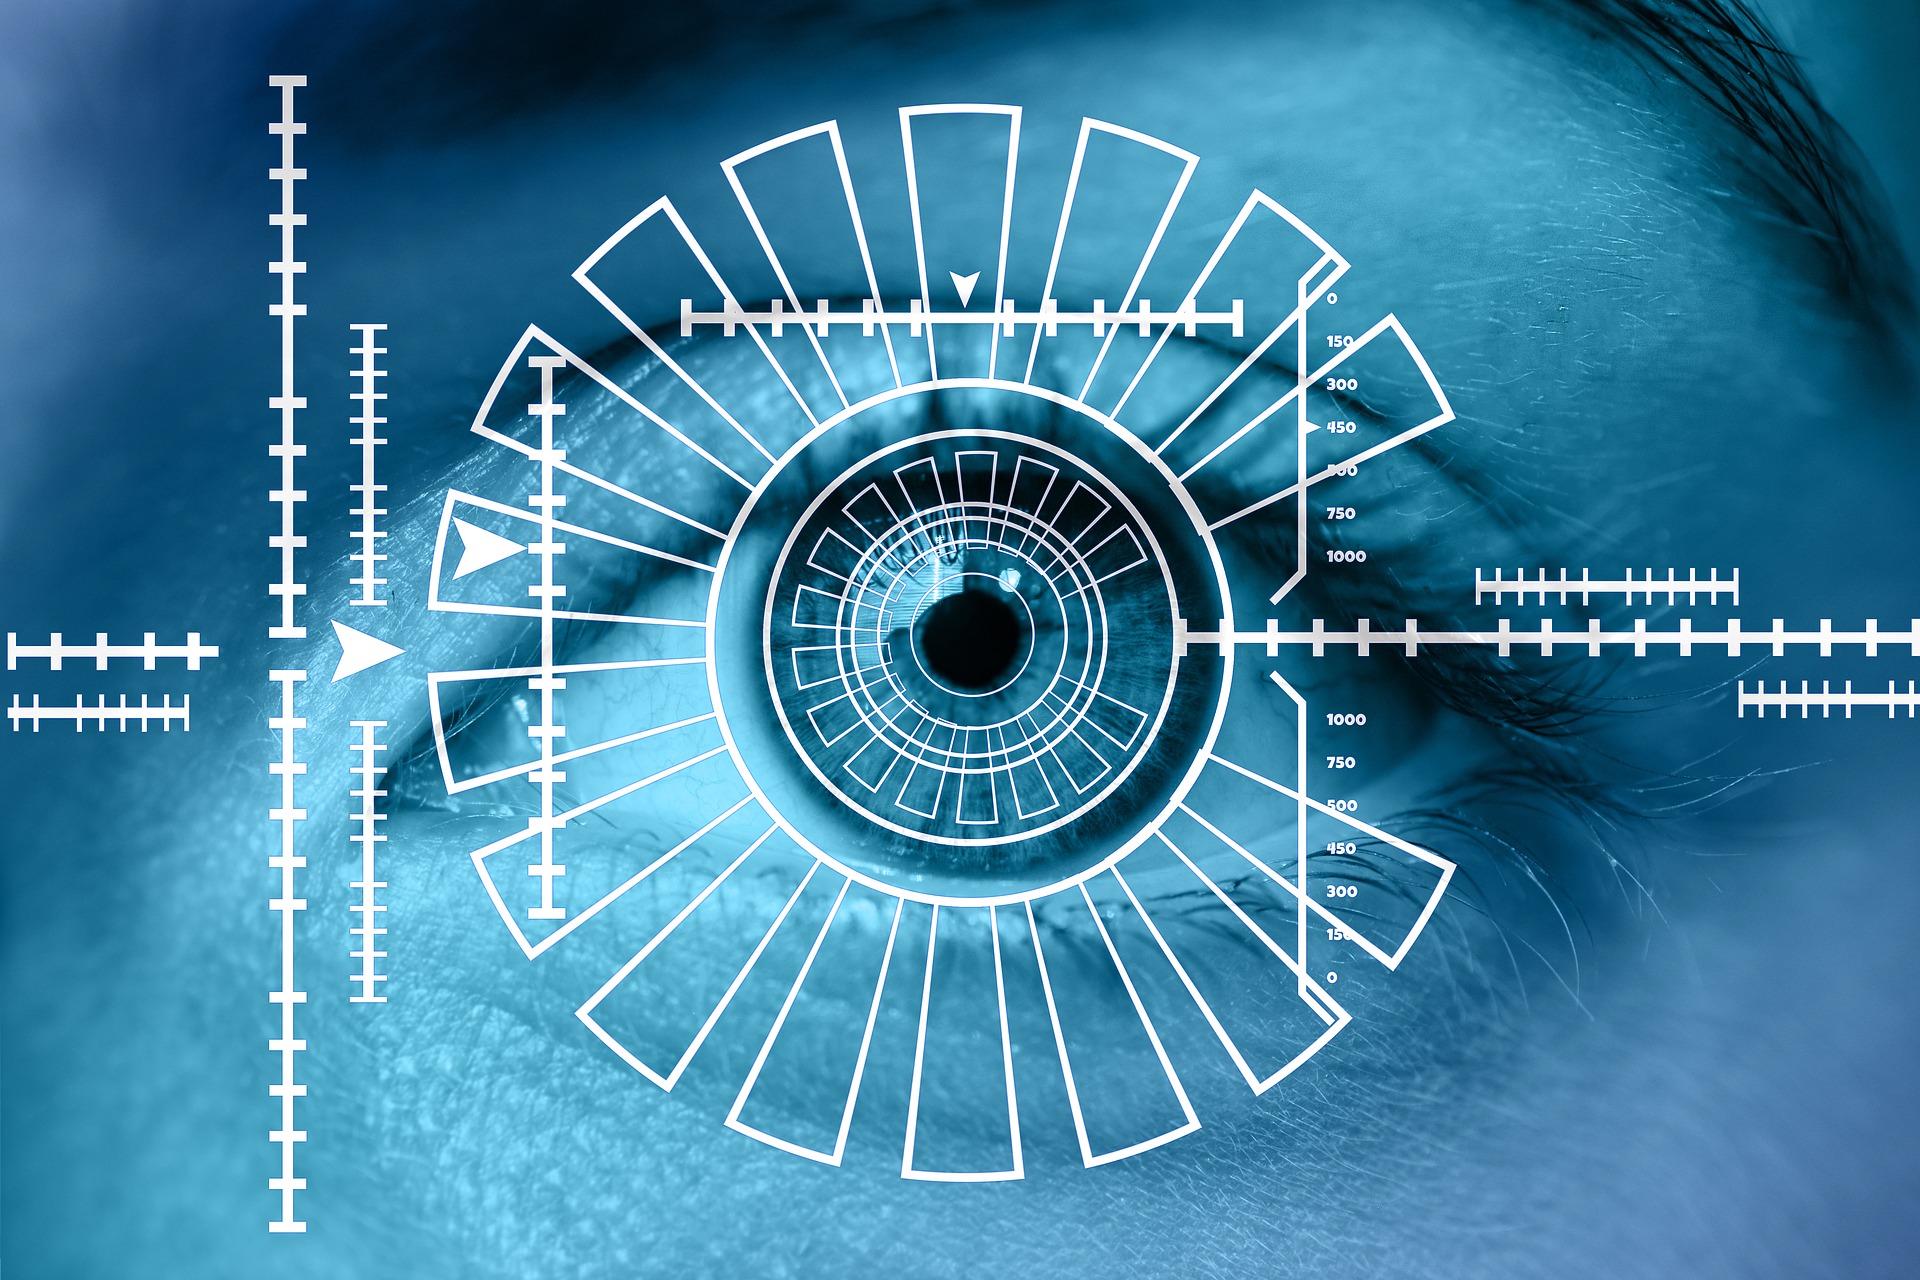 iris scan technology collecting data from human eyeball image link to story